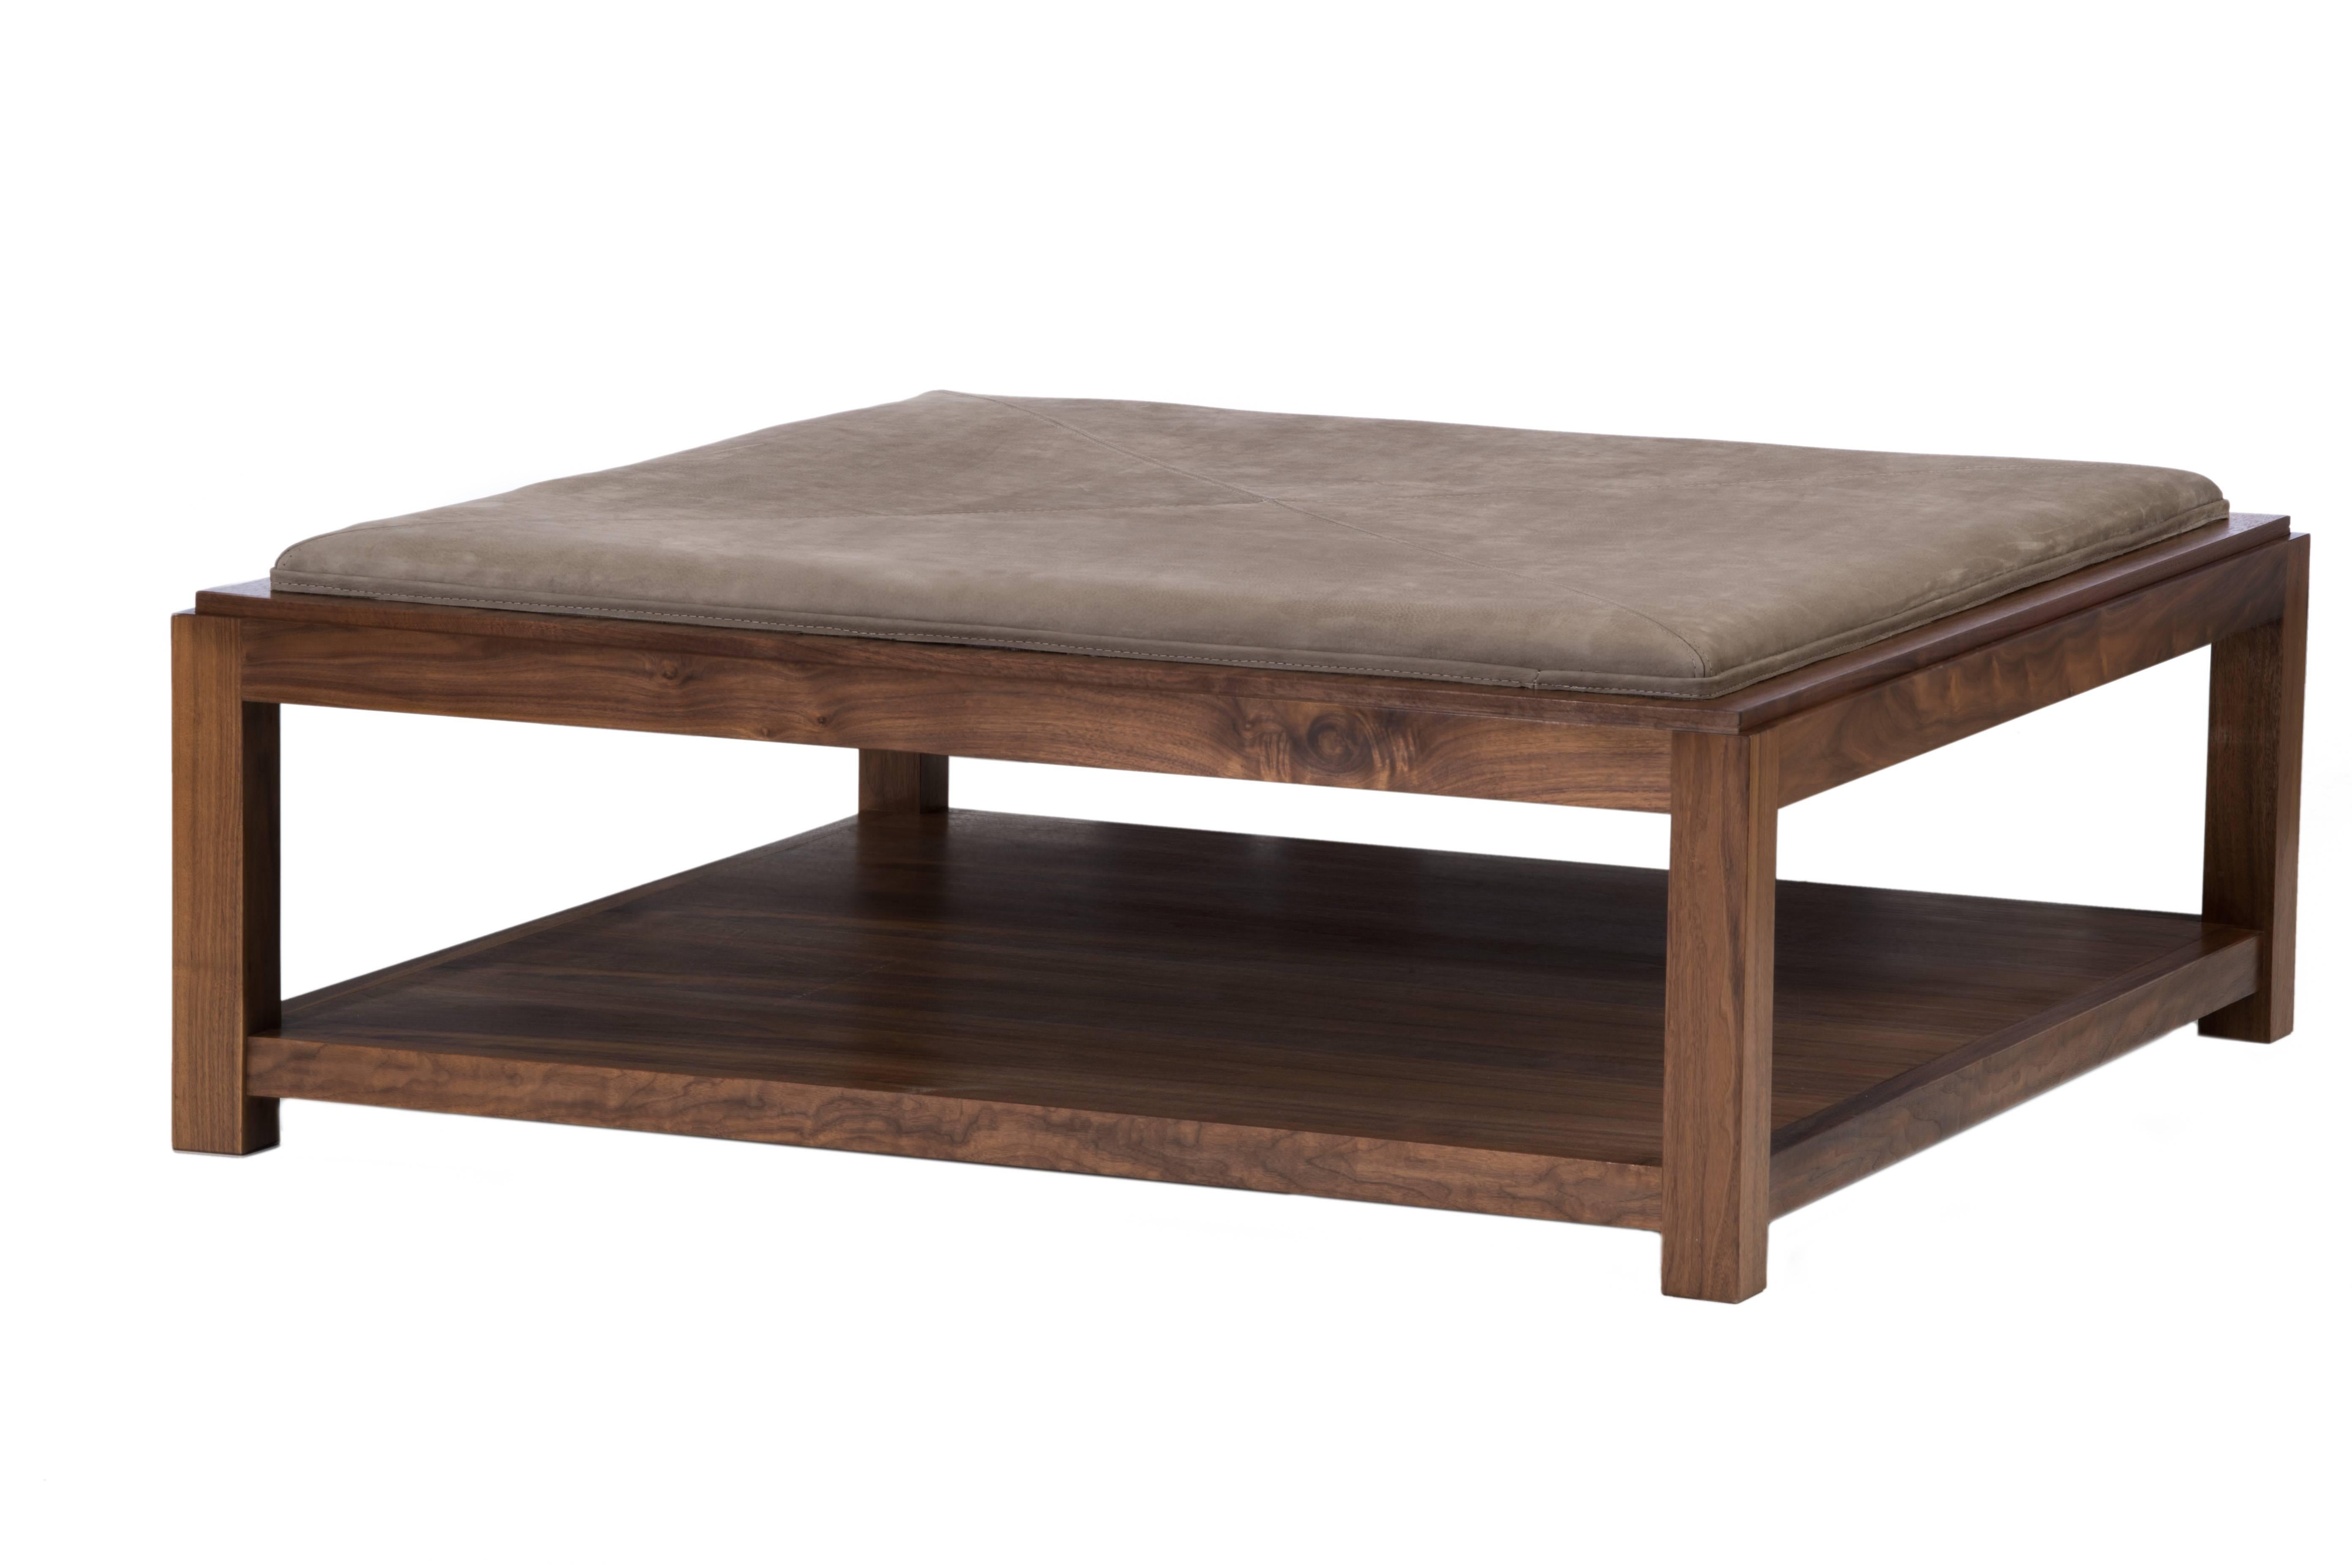 Designed by Ashley Yeates, the Landon coffee table is handmade in the United States. The ideal piece for indecisive minds wanting function and comfort without sacrificing style. Landon Ottoman offers versatility with a North American Walnut top that